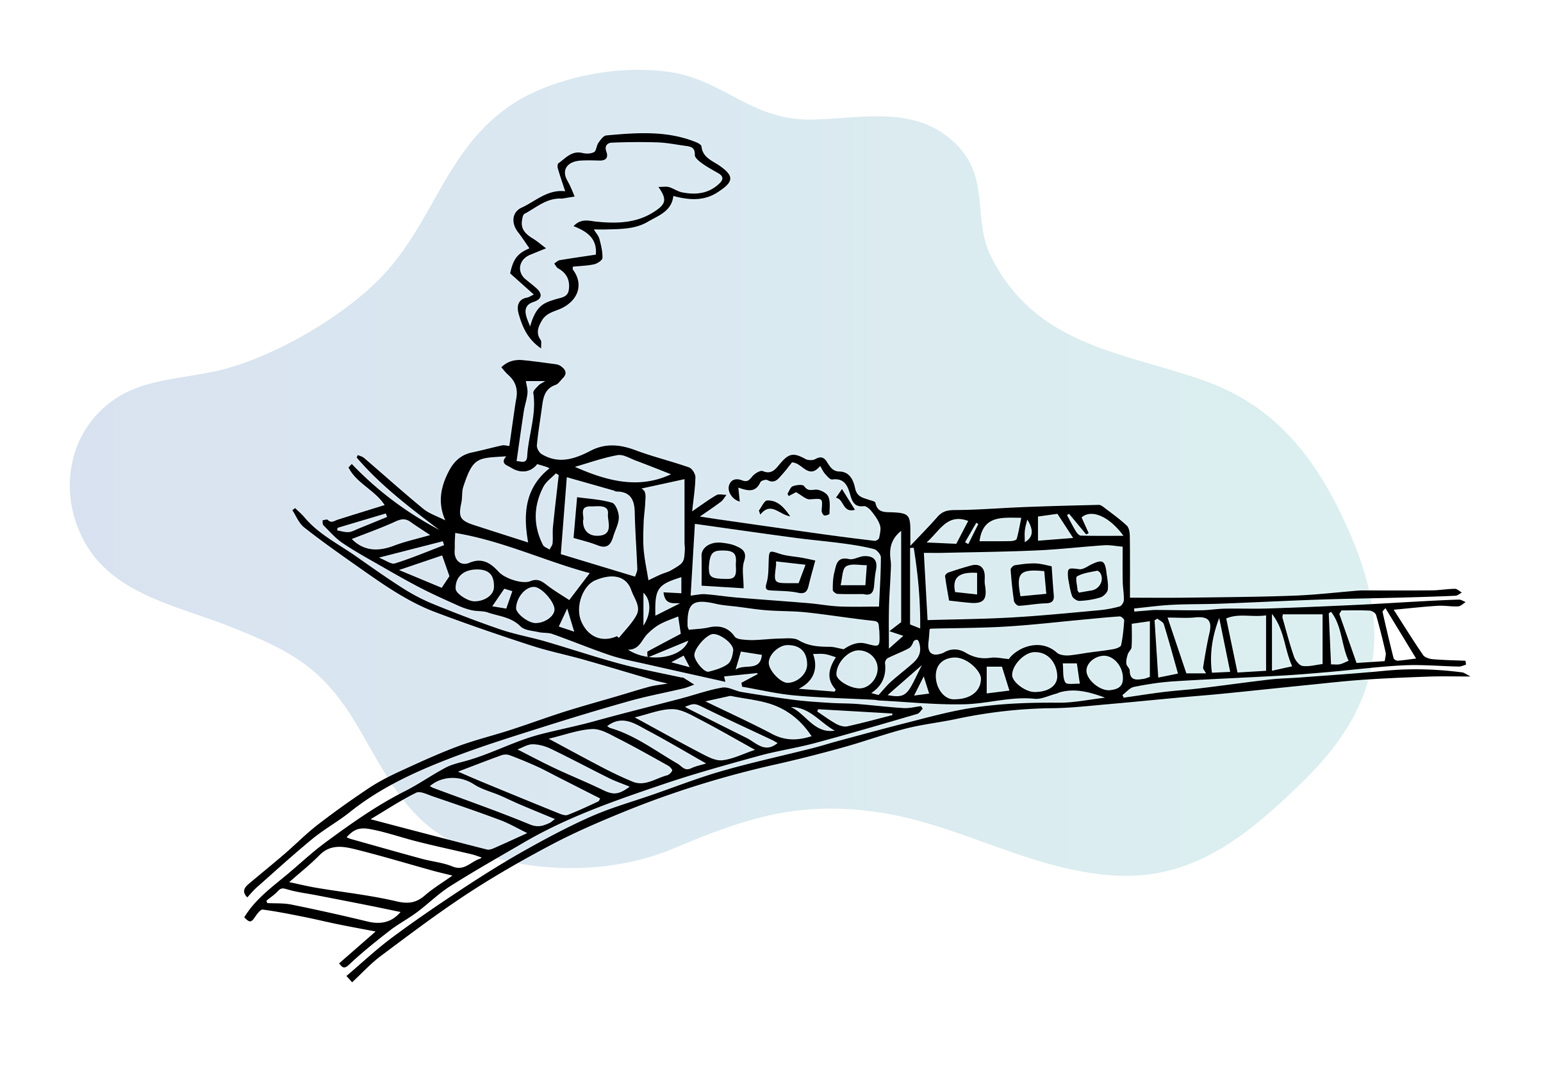 Line illustration of coal-locomotive train at rail junction divergence, continuing on the track that curves away